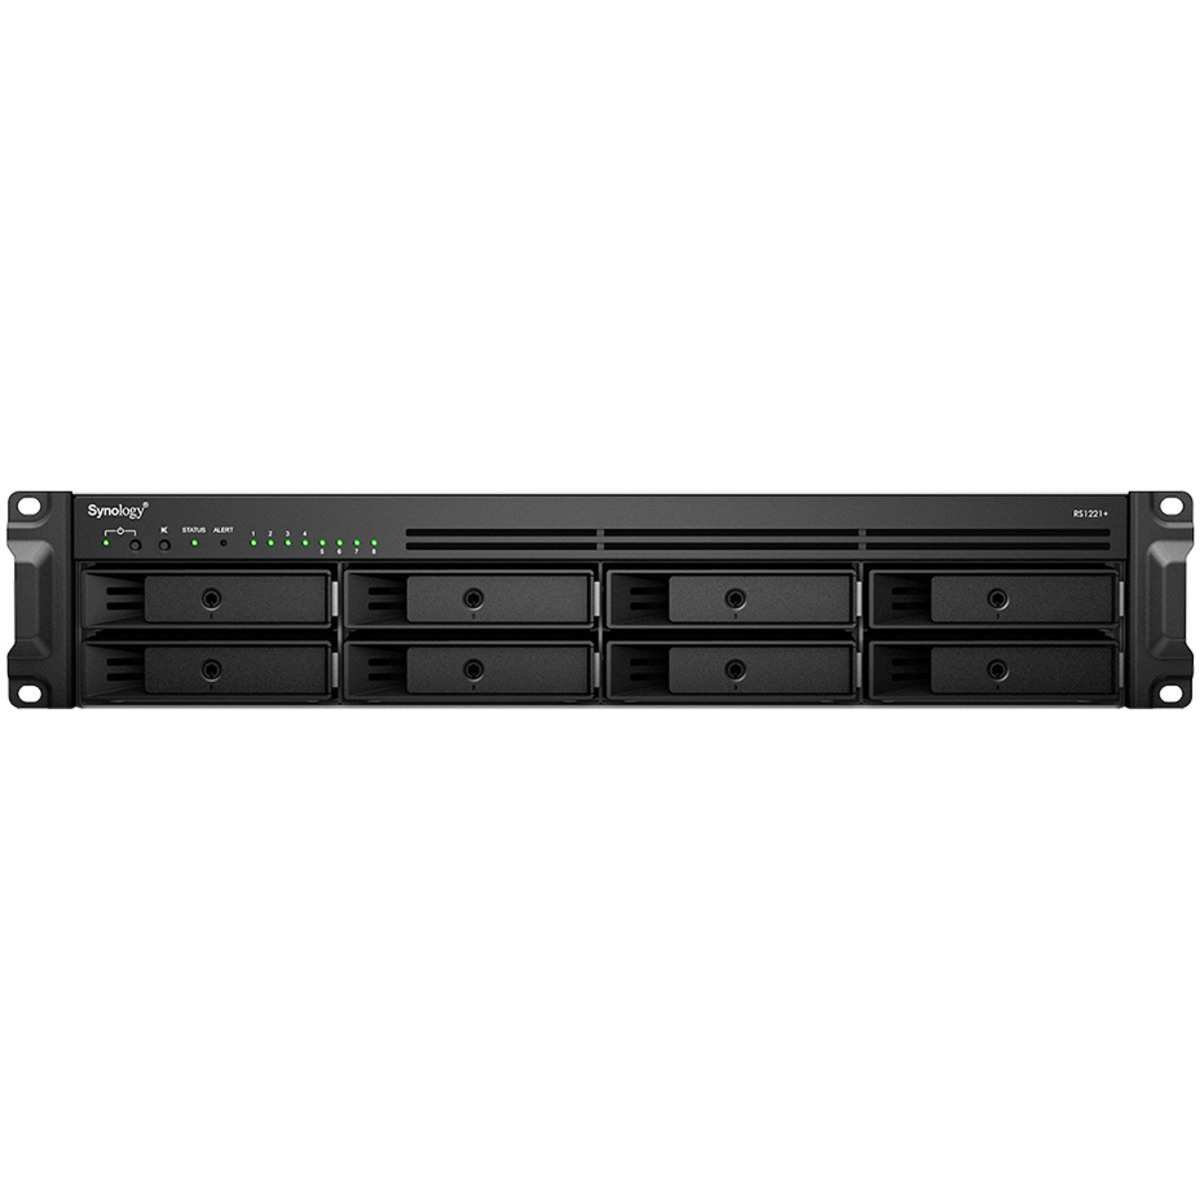 Synology RackStation RS1221RP+ 2.5tb 8-Bay RackMount Multimedia / Power User / Business NAS - Network Attached Storage Device 5x500gb Crucial MX500 CT500MX500SSD1 2.5 560/510MB/s SATA 6Gb/s SSD CONSUMER Class Drives Installed - Burn-In Tested - FREE RAM UPGRADE RackStation RS1221RP+